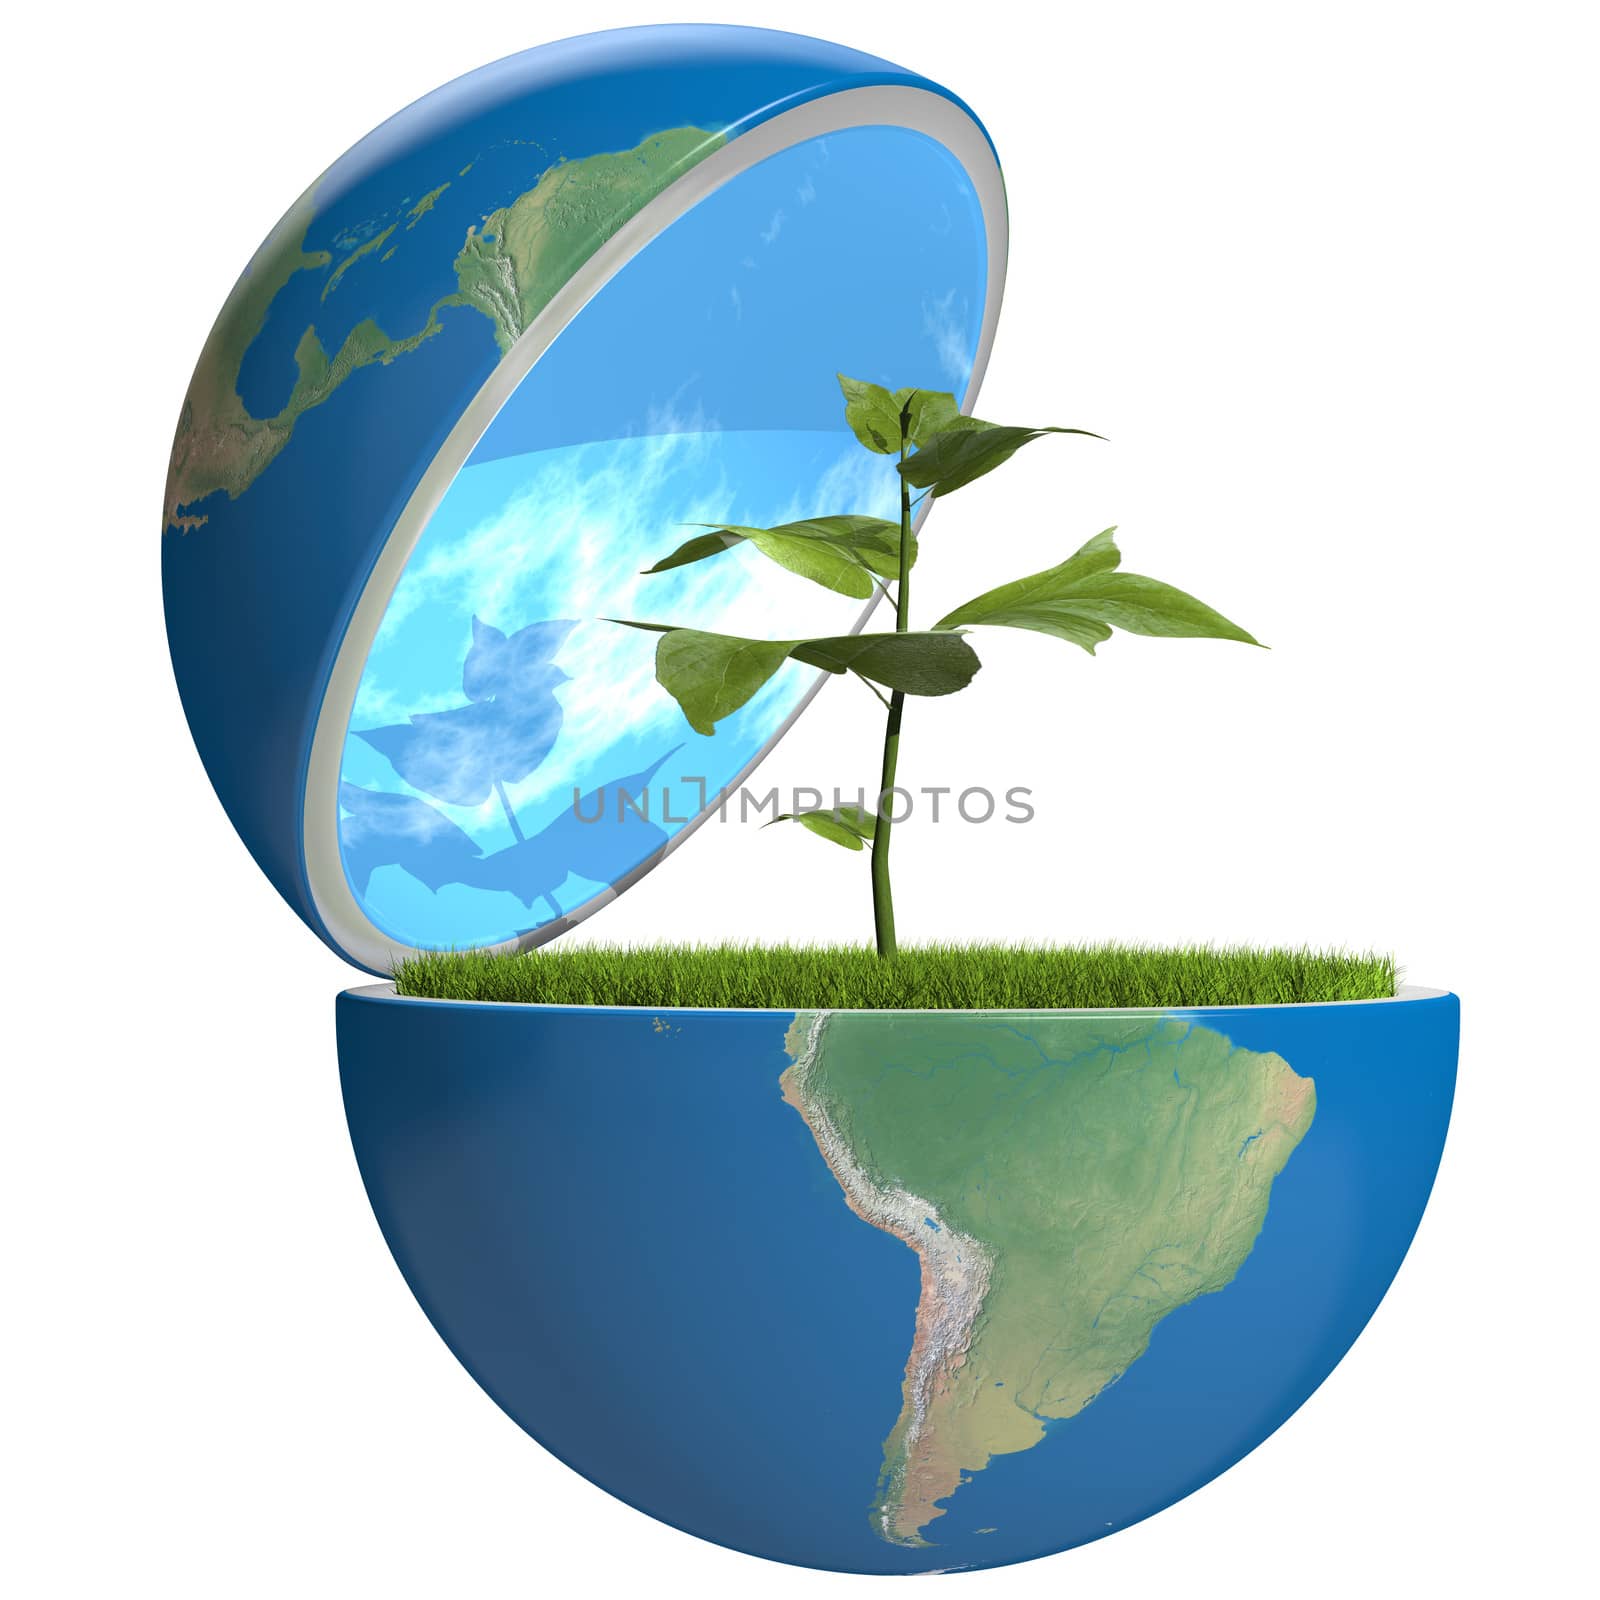 Small plant growing inside opened planet Earth, isolated on white background, concept of ecology, symbol of new life. Elements of this image furnished by NASA